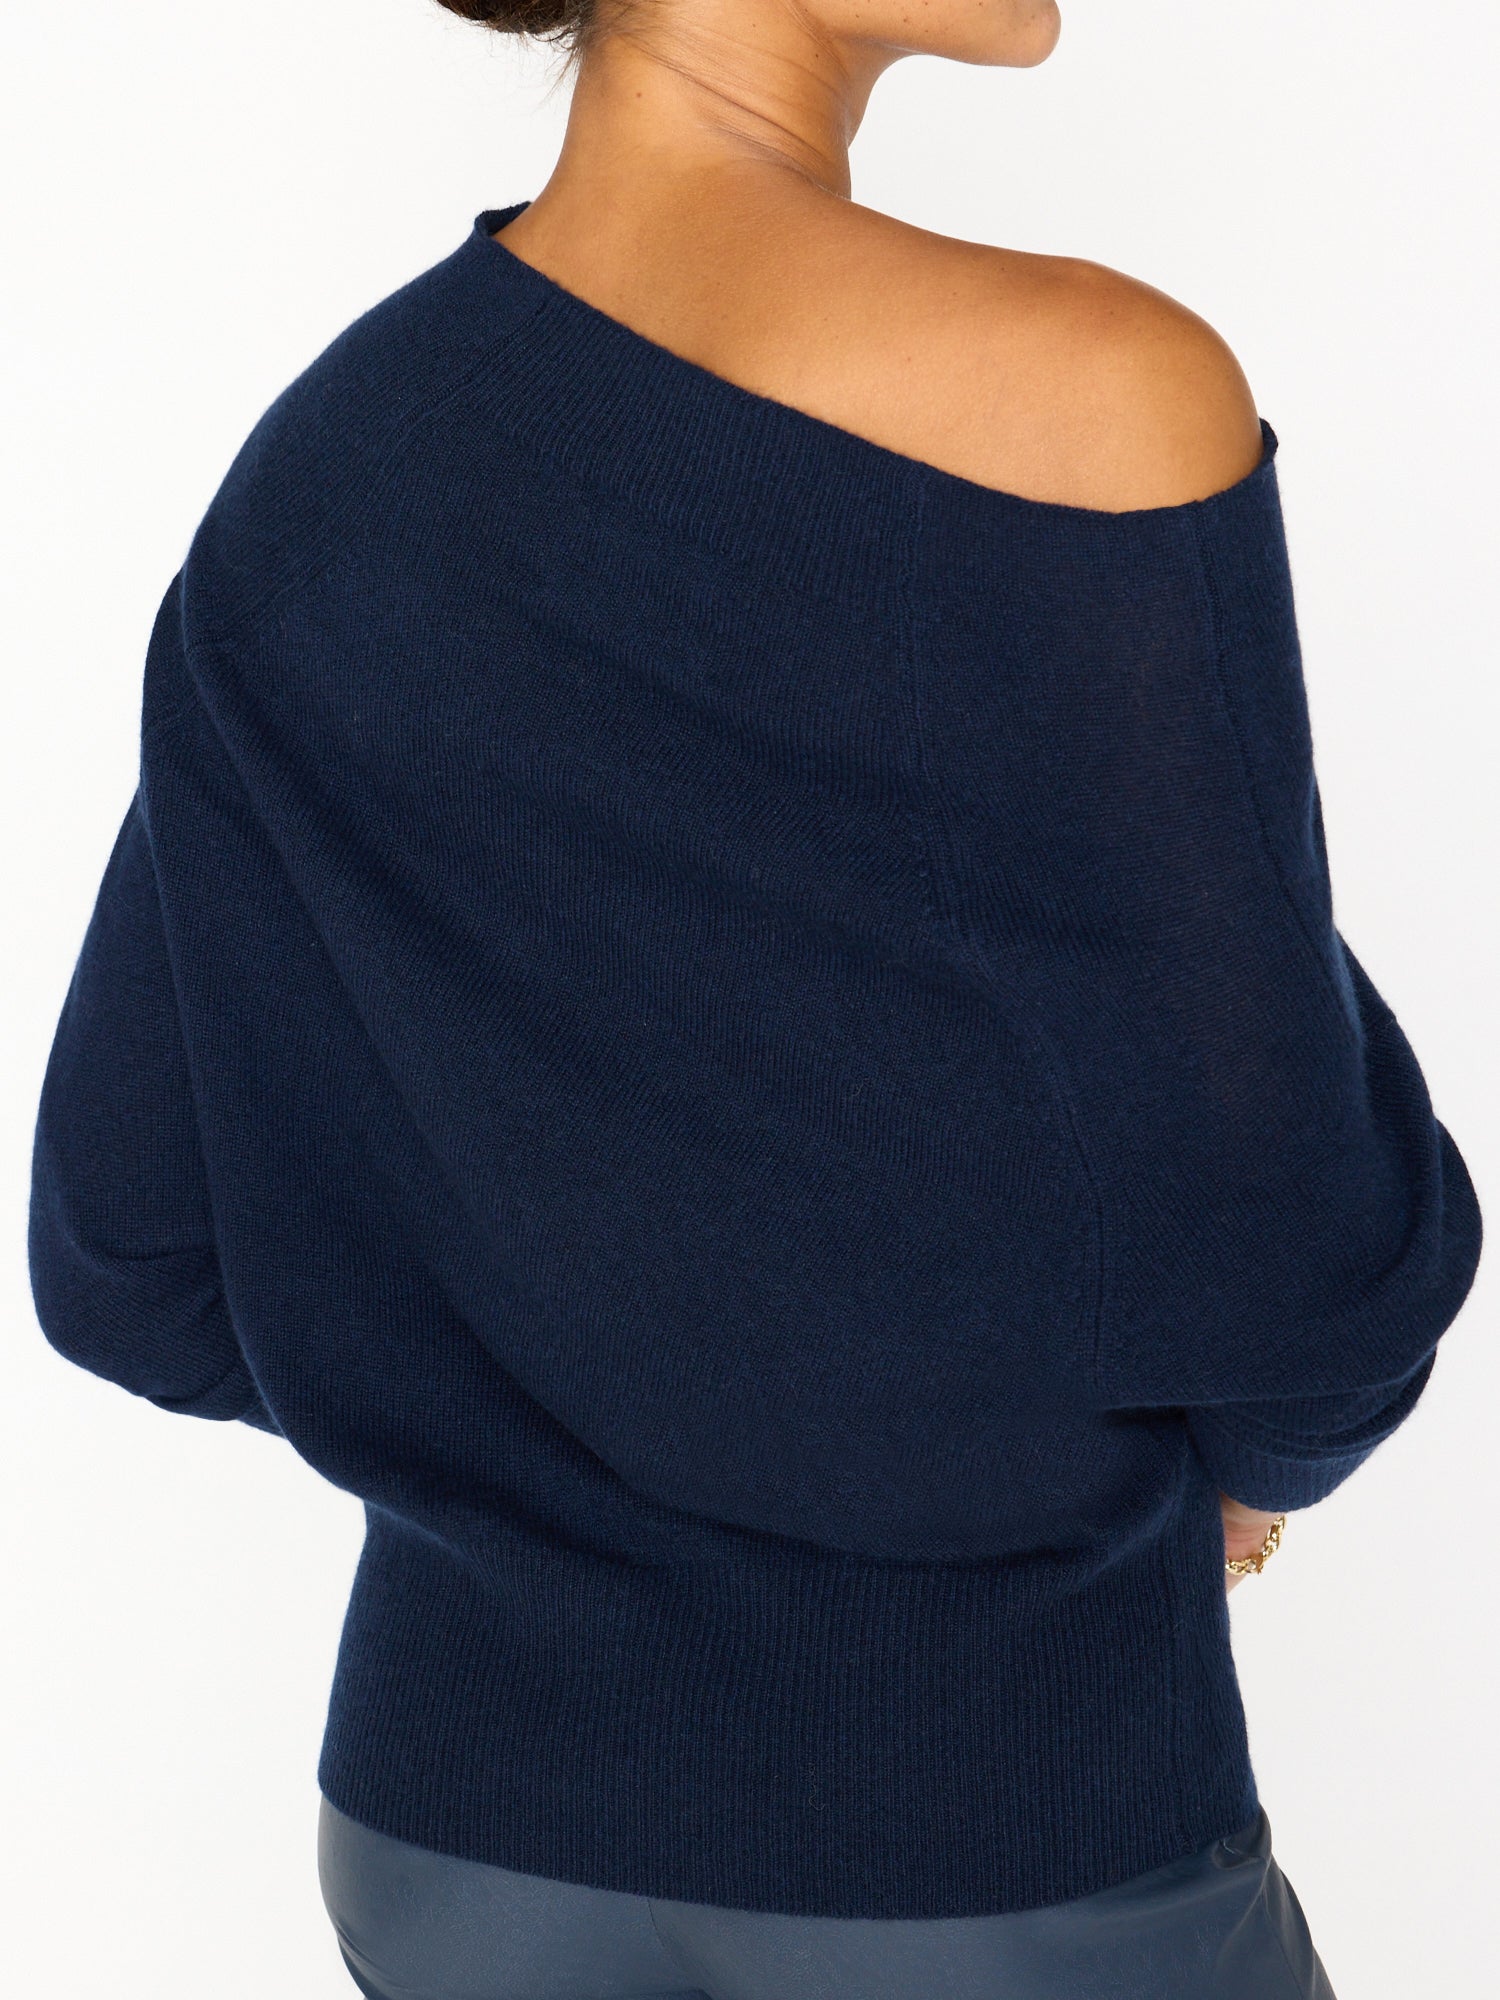 Lori cashmere off shoulder navy sweater back view